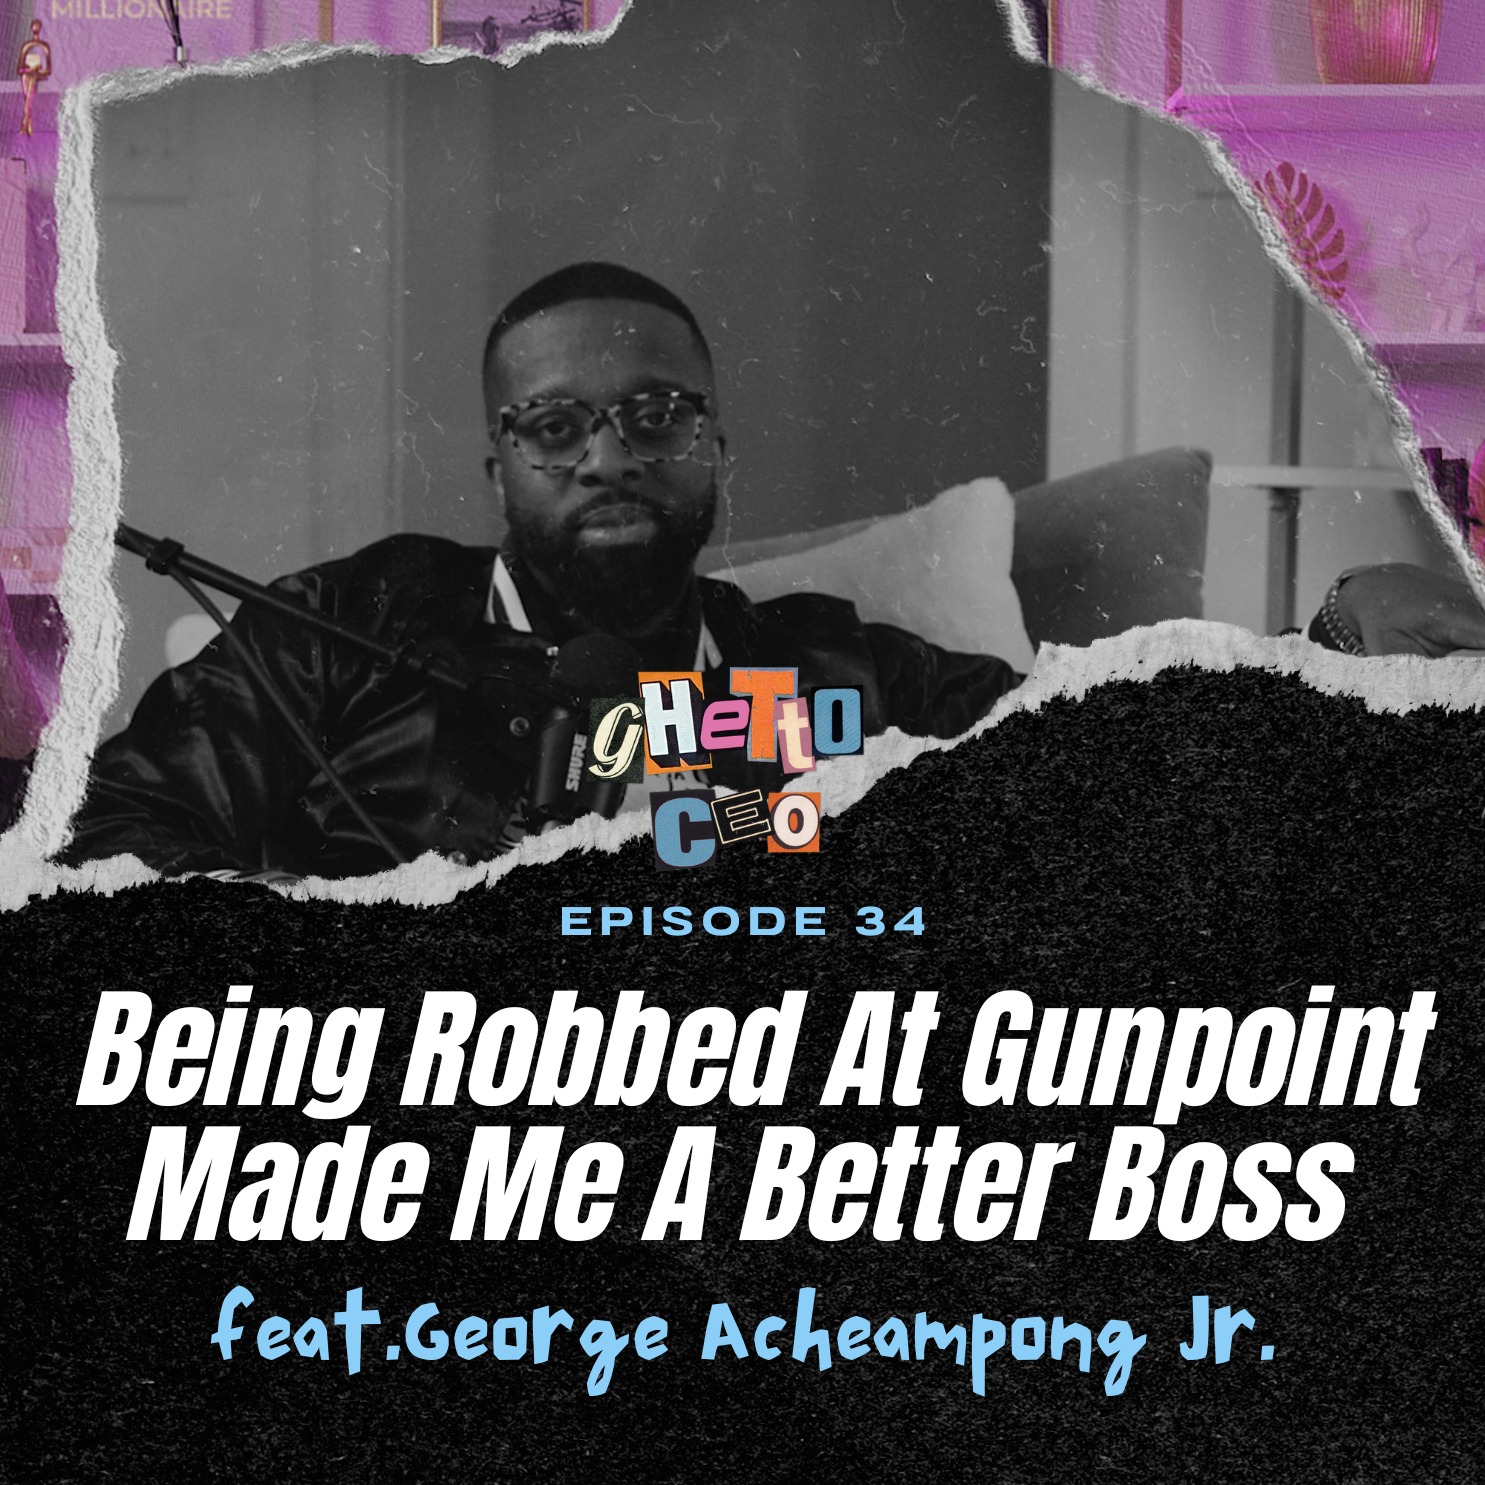 Being Robbed At Gunpoint Made Me A Better Boss Ft. George Acheampong Jr.